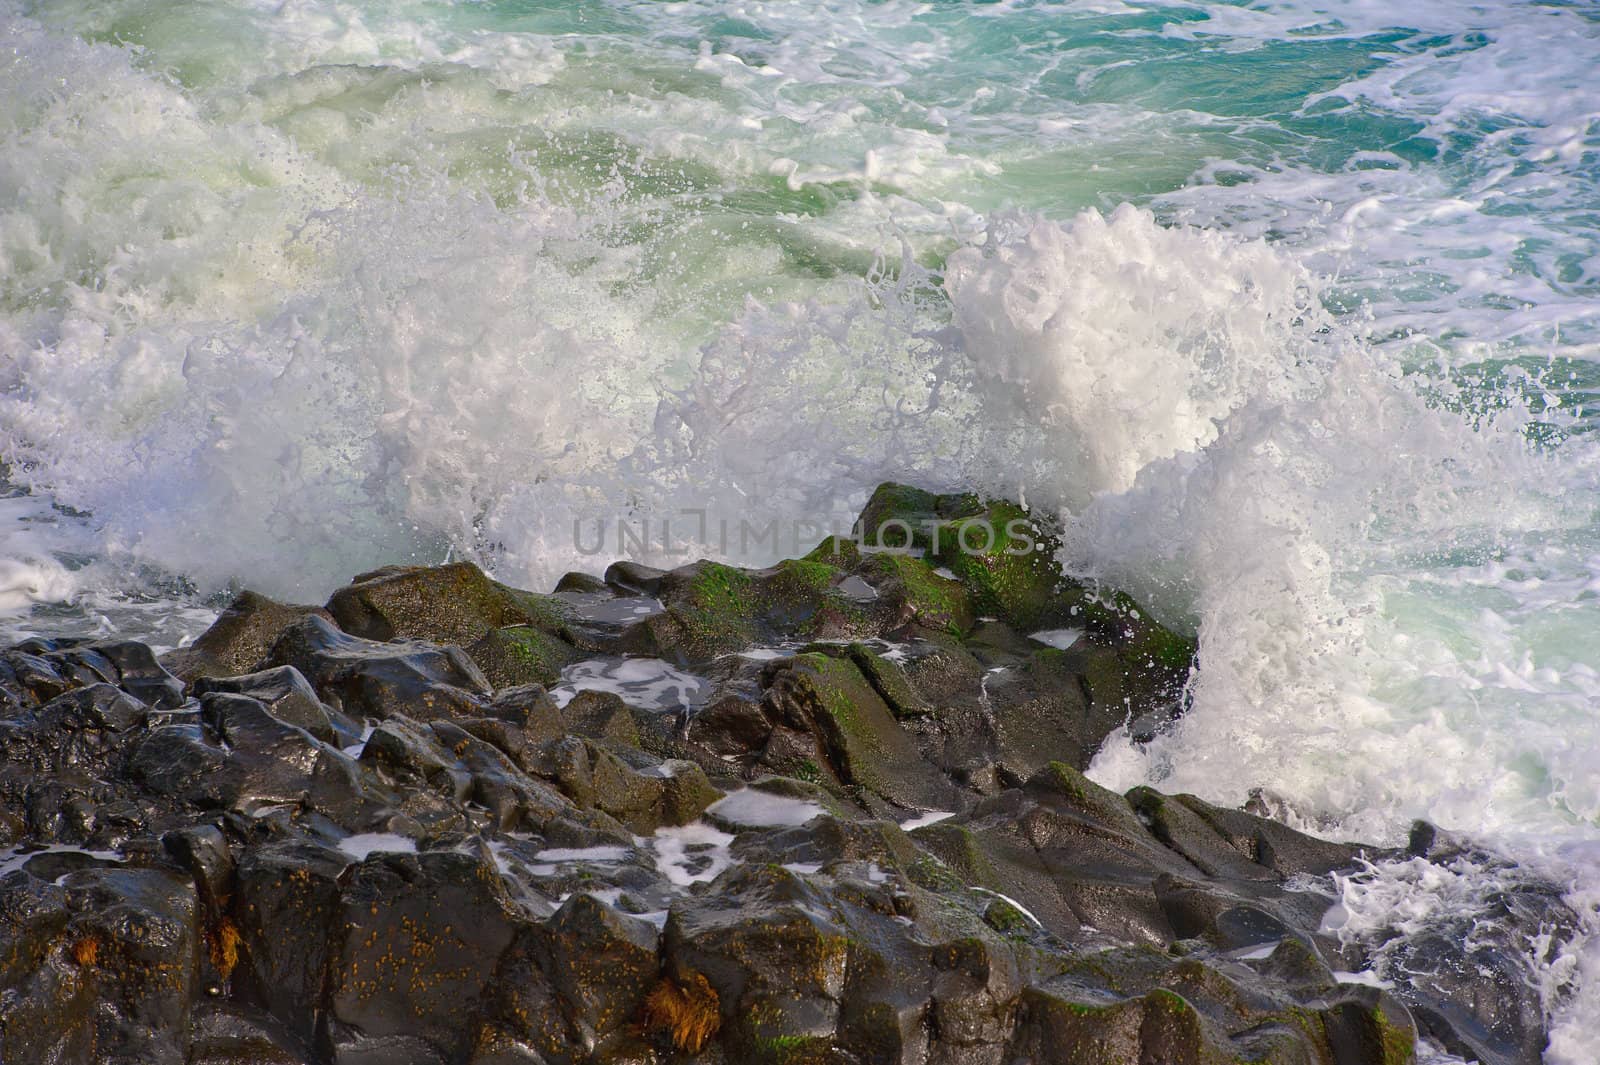 Breaking waves Against The Rocky Shore Of Maui, Hawaii Islands, USA
